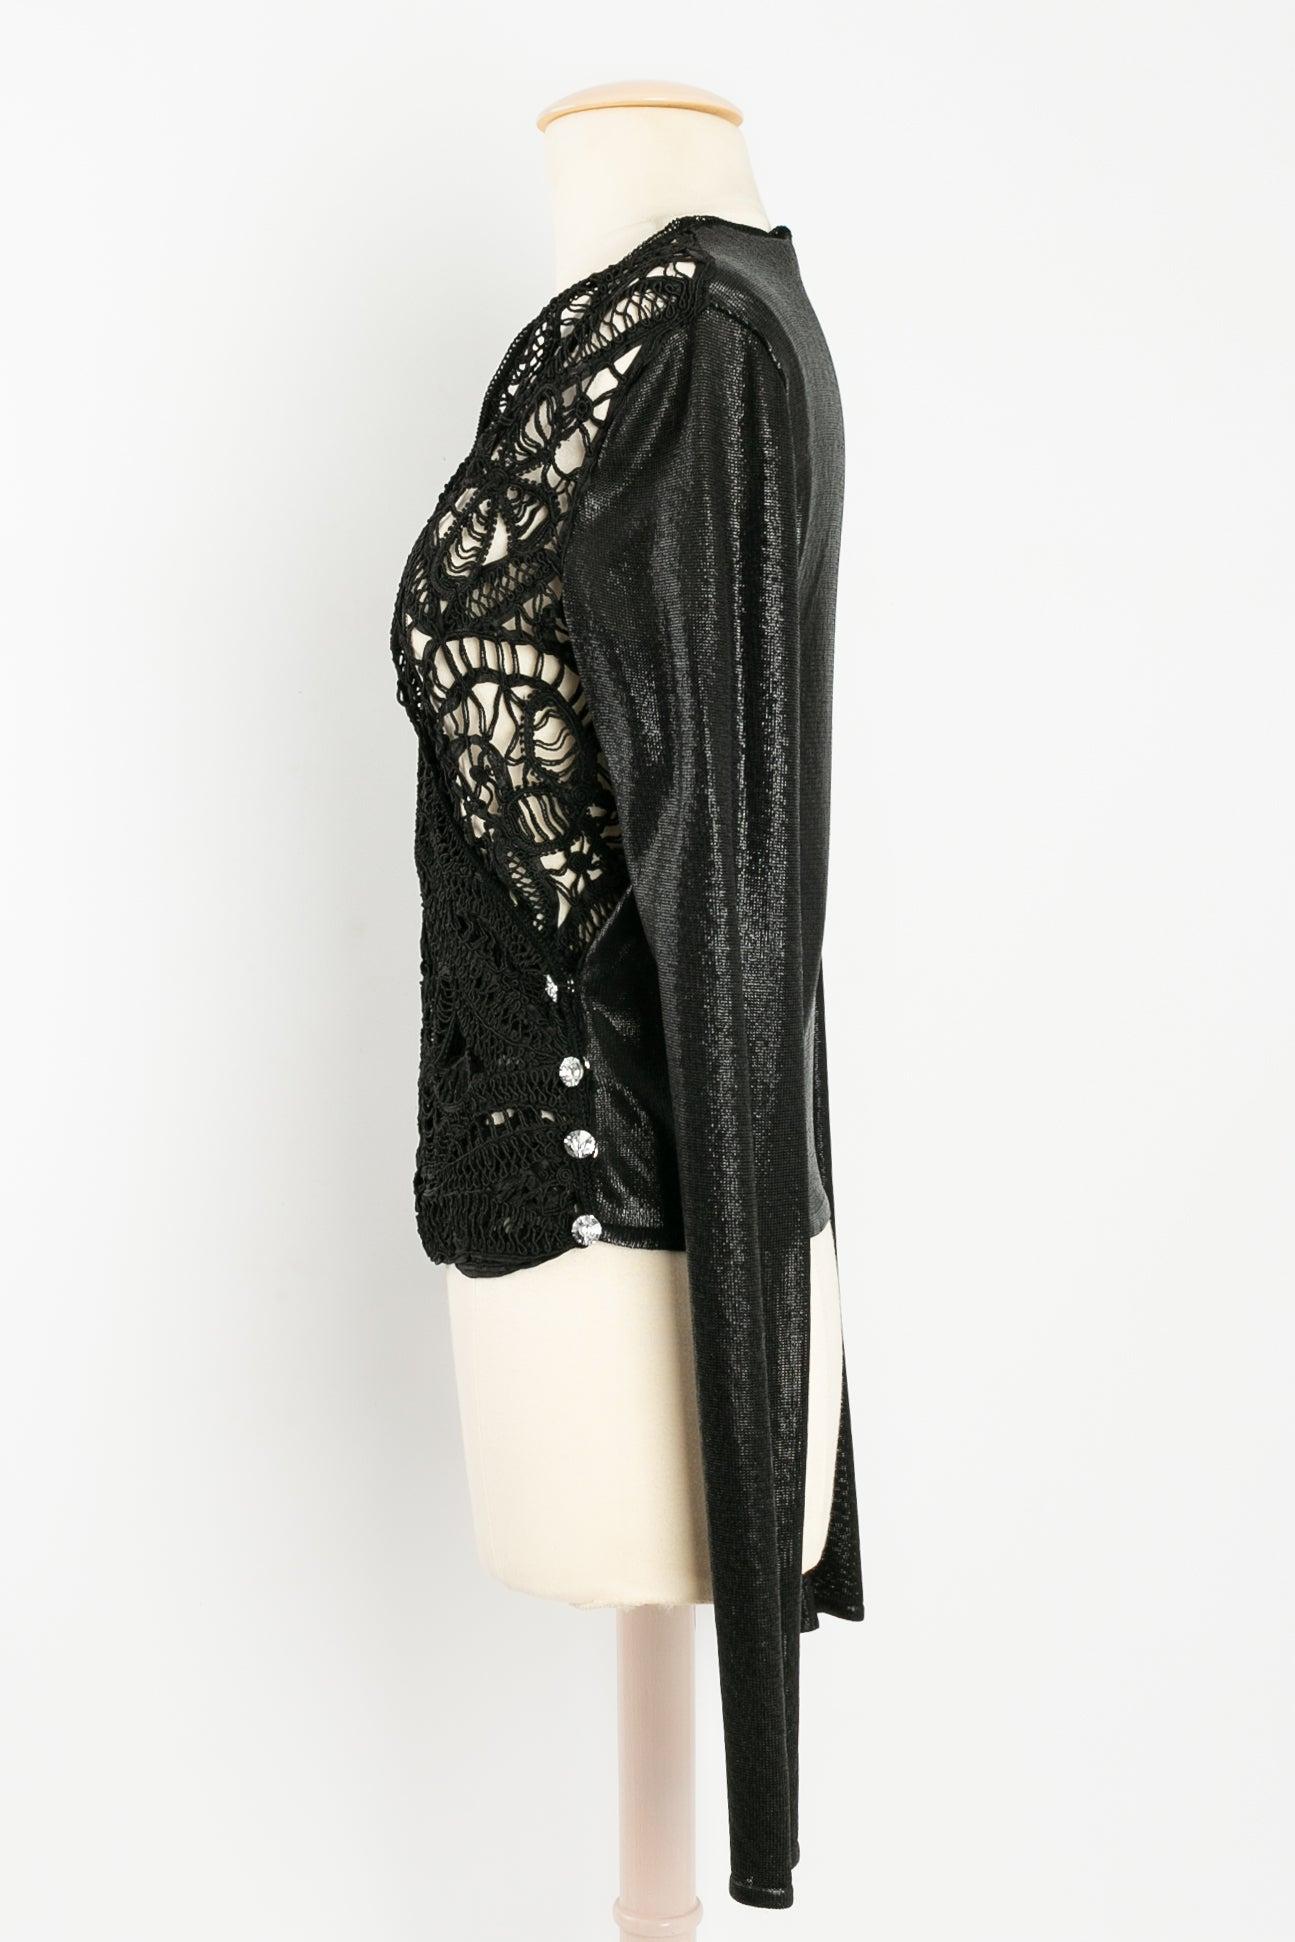 John Galliano - Wrap top in lace-like crochet and knit with a coated fabric effect. No indicated size, it fits a size 38FR.

Additional information:
Condition: Very good condition
Dimensions: Shoulders: 45.5 cm (17.91